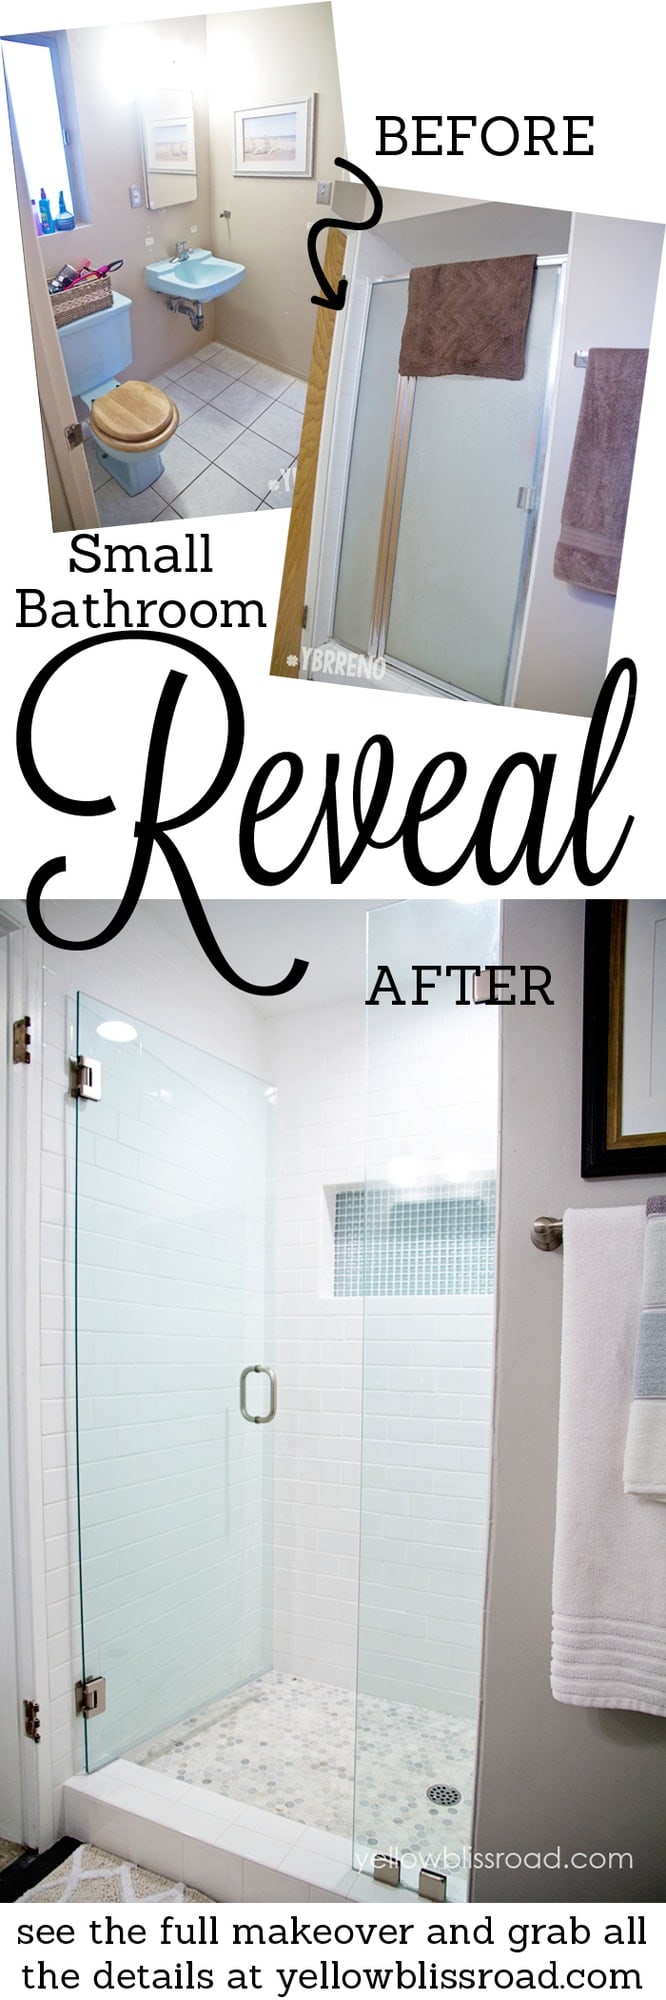 Small bathroom makeover before and after